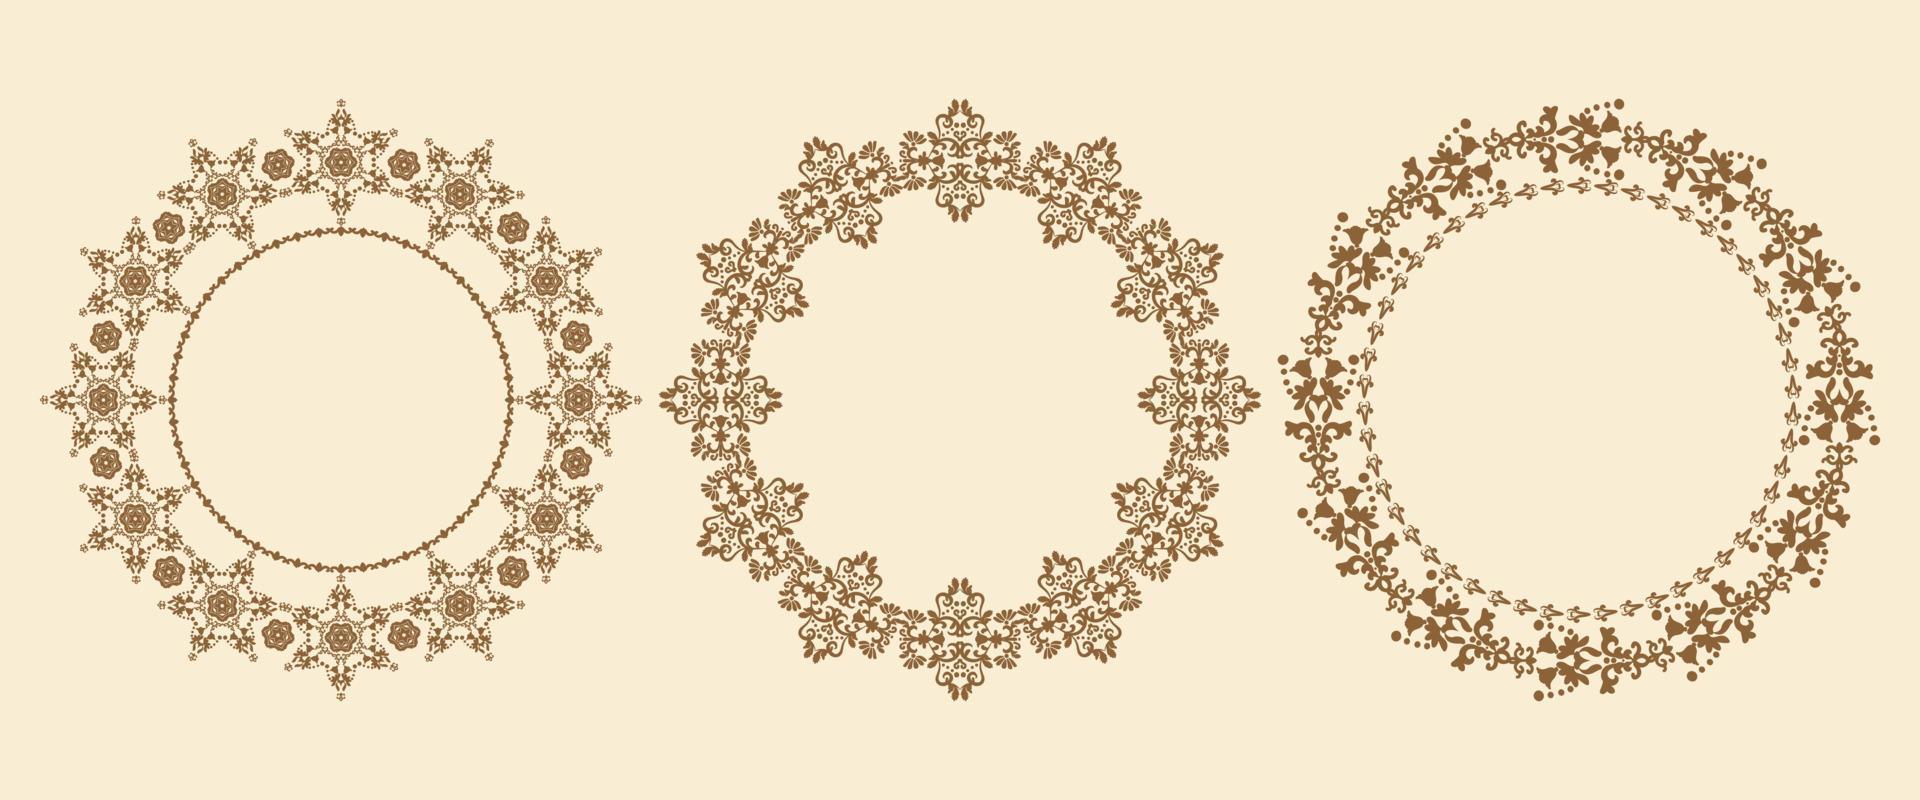 Patterned round frames. Collection of round damask patterns. Brown carved borders on a beige background. Vector illustration.